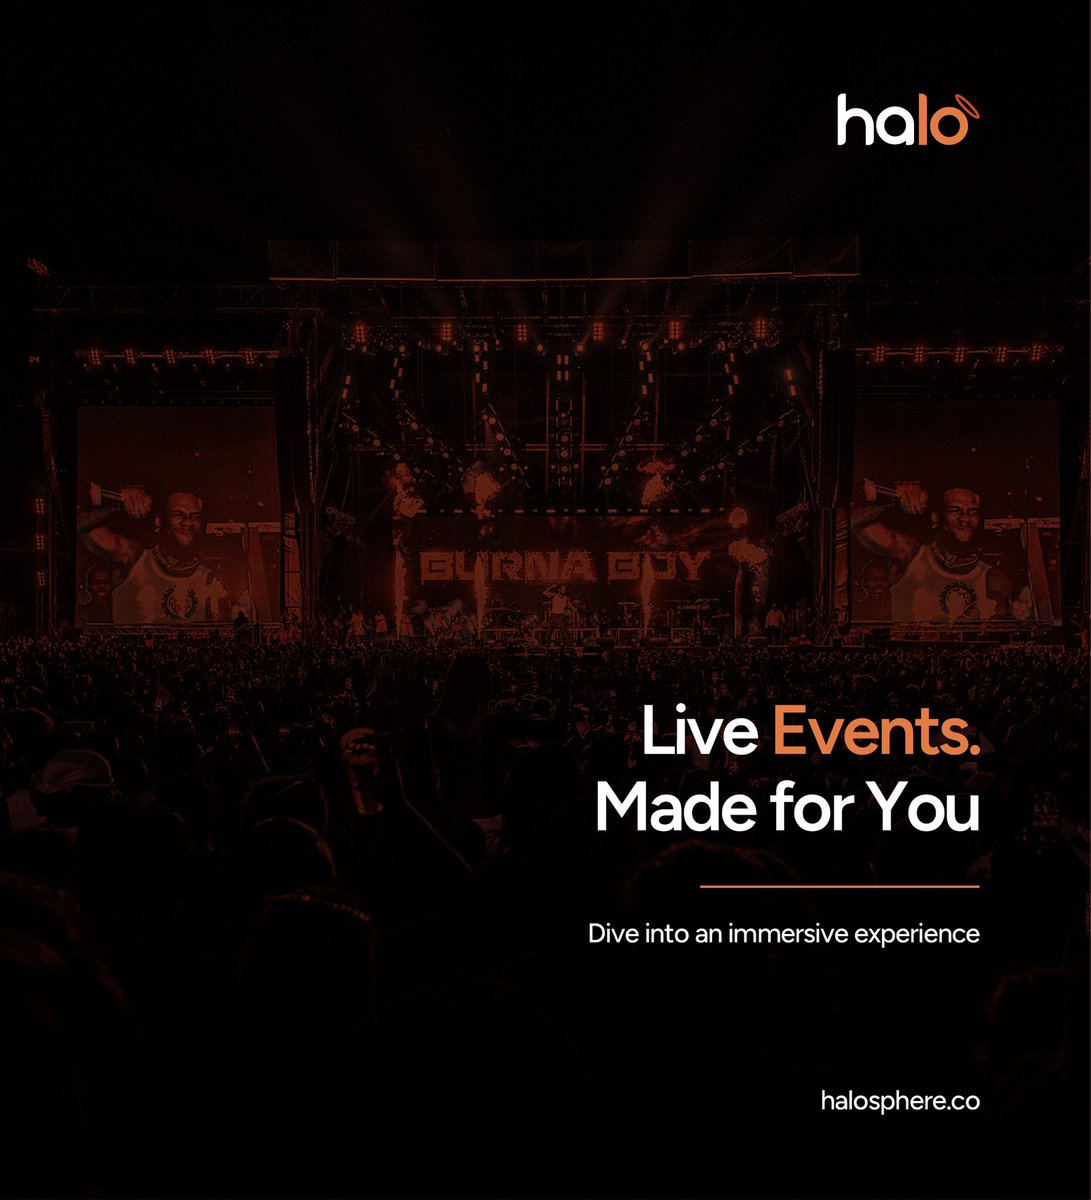 Experience the thrill of live events, right where you are! Your all-access pass to a whole new immersive world is here — one where you’d never miss an event!
#halo #haloxp #emergingtechnology #experience #music #product #comingsoon #live #stream #livestream #app #liveevents